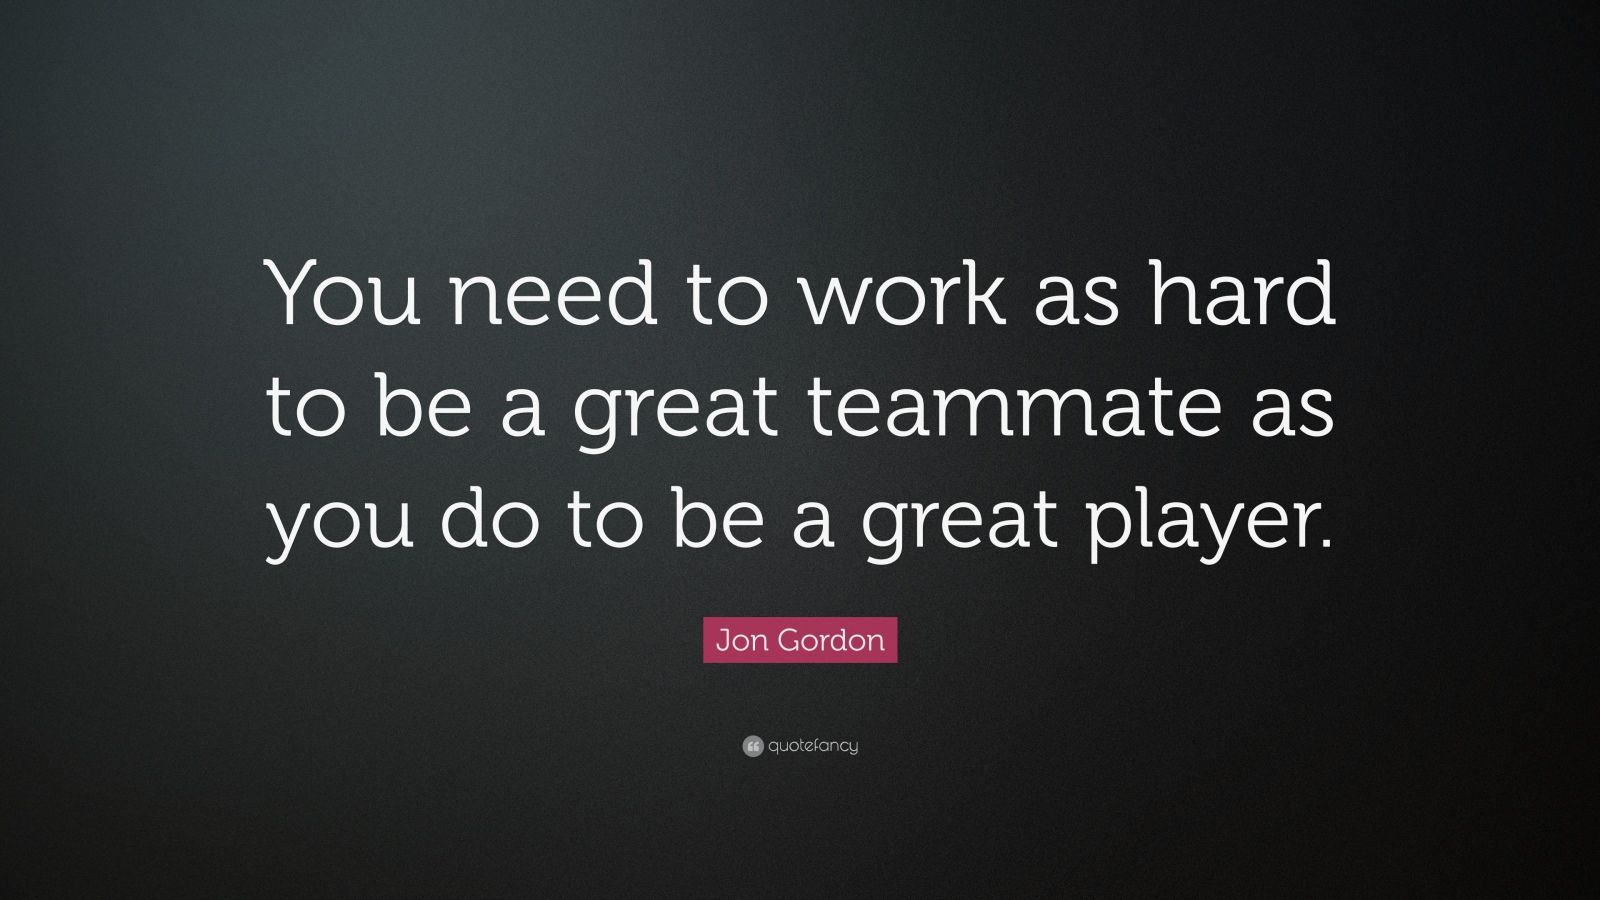 Jon Gordon Quote: “You need to work as hard to be a great teammate as ...